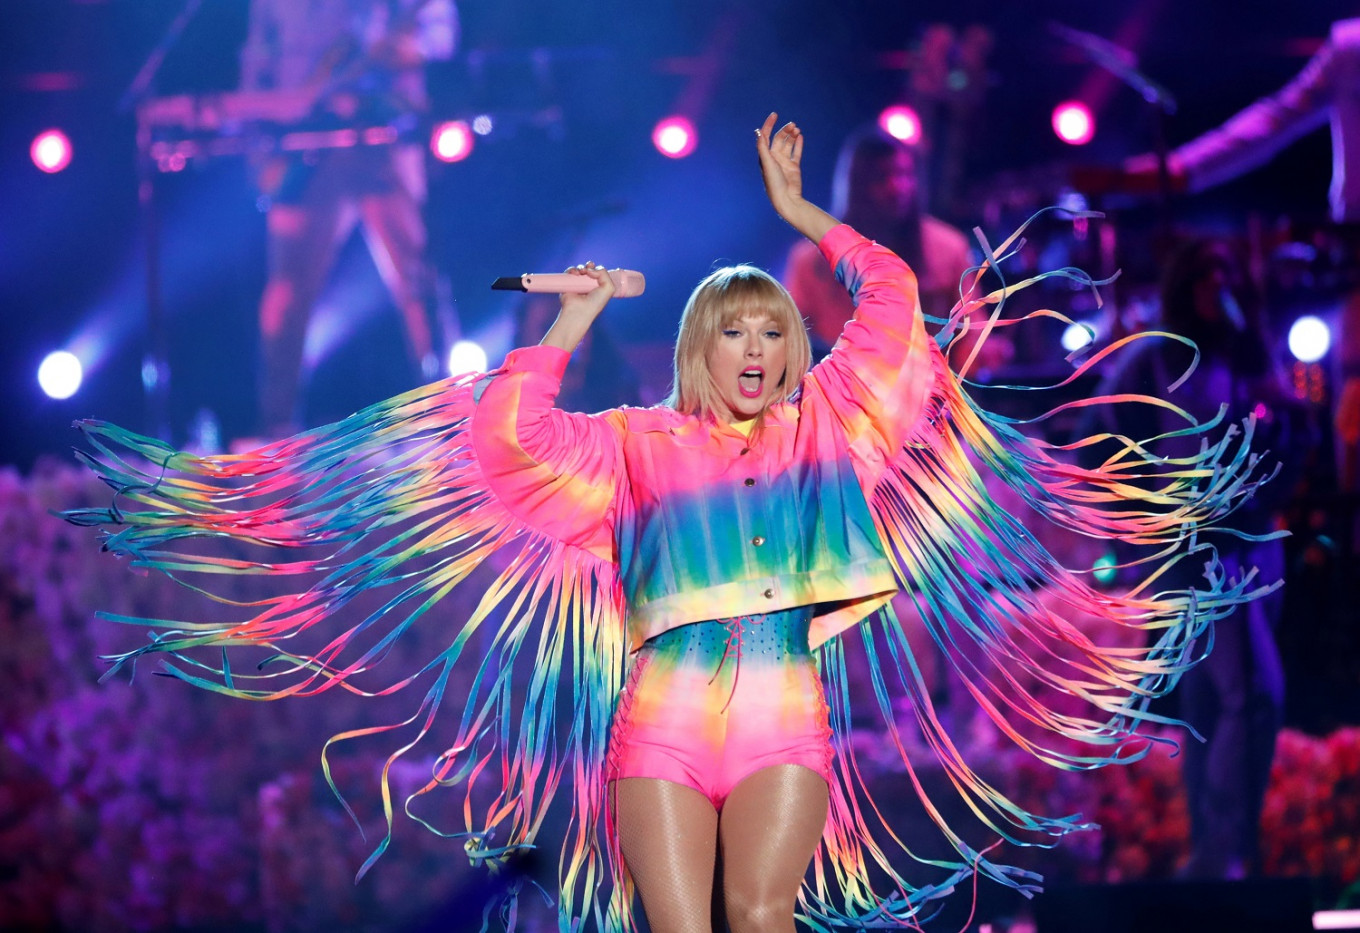 Taylor Swift to broadcast special Paris concert - Entertainment - The ...